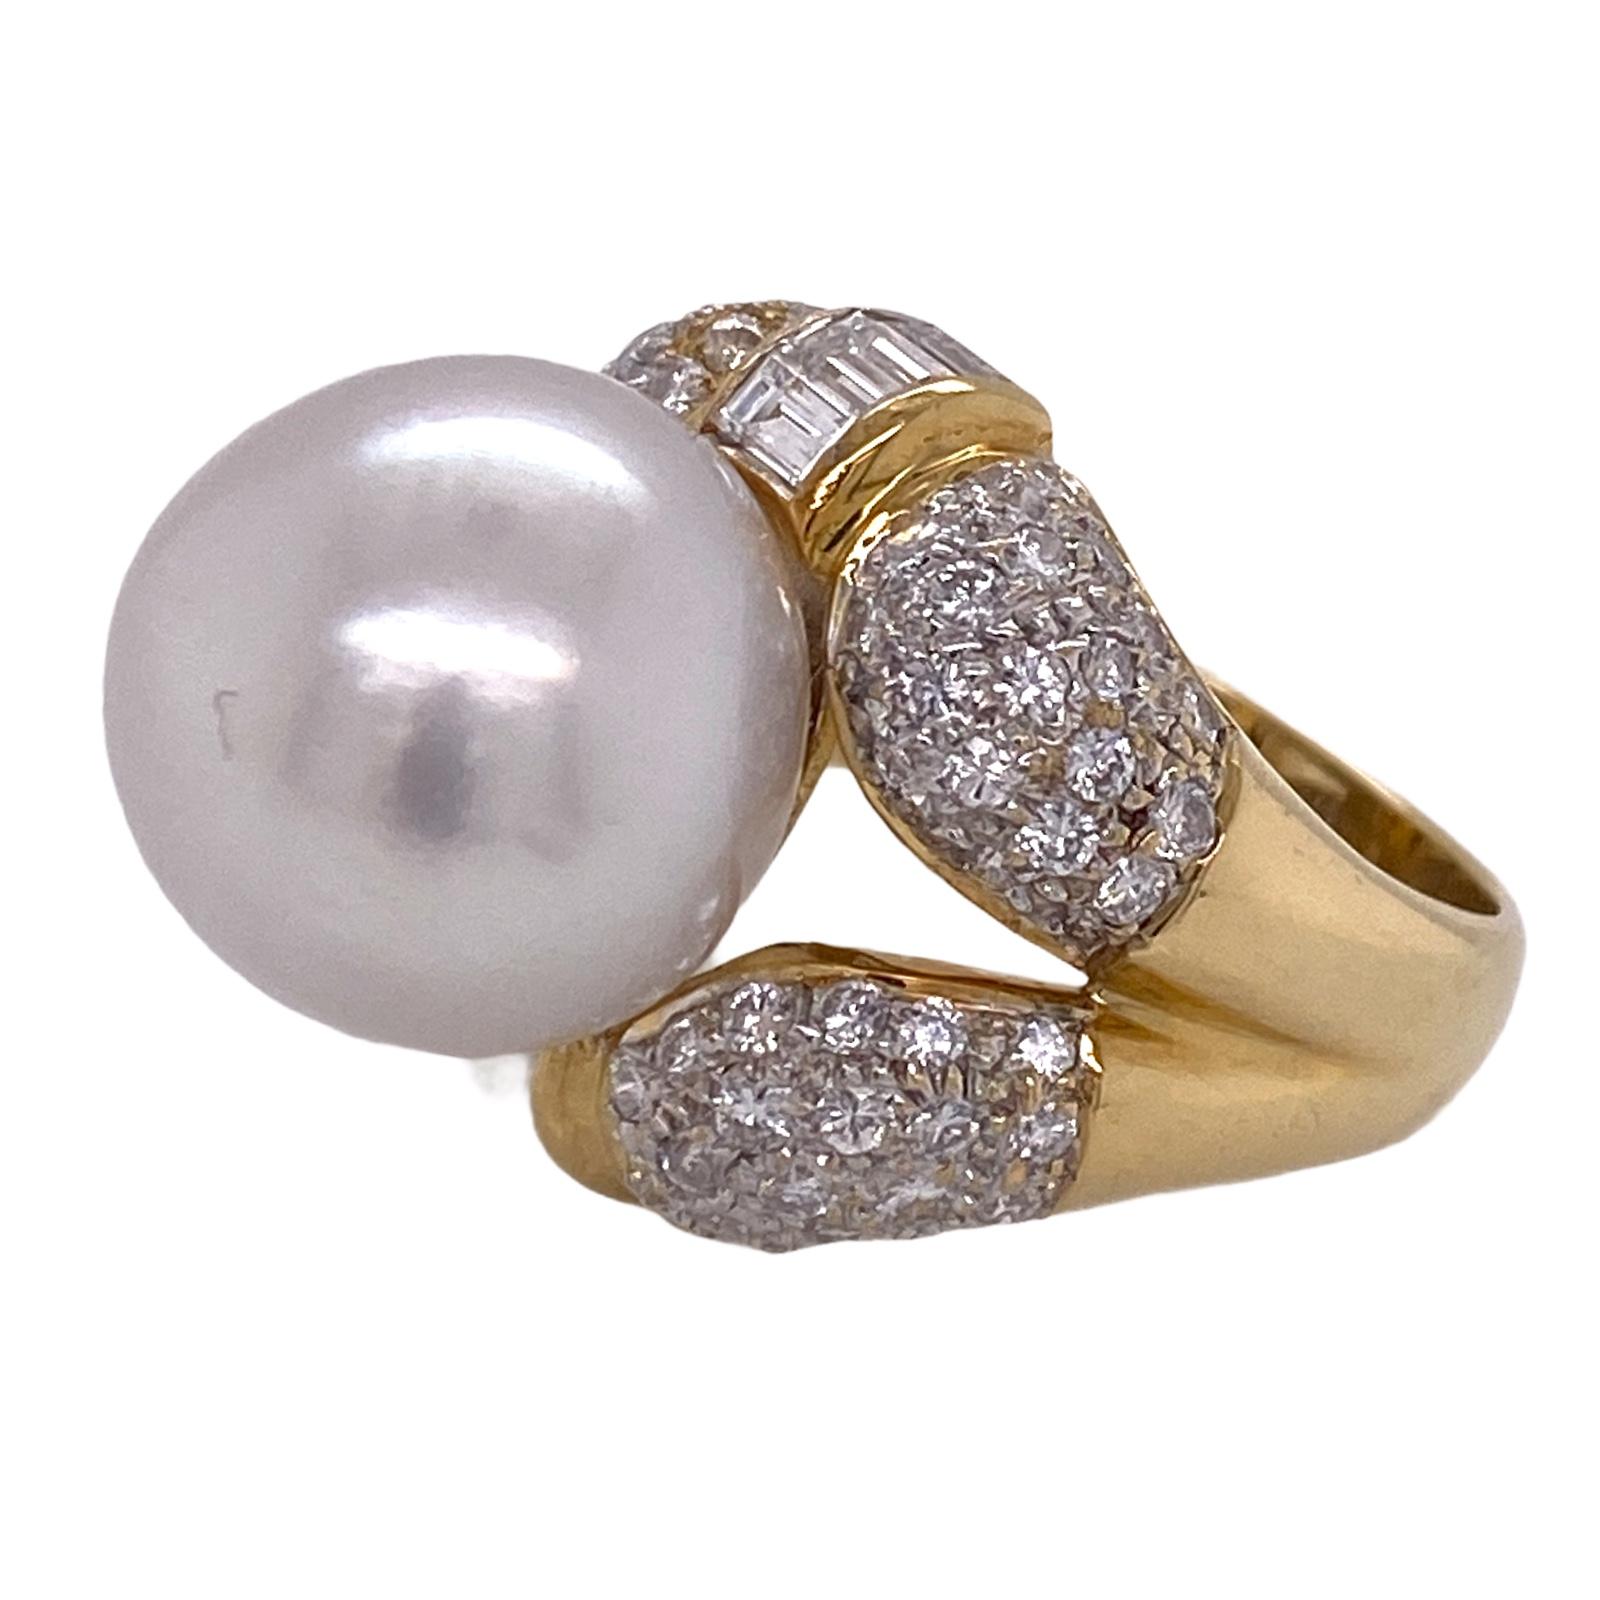 Stunning South Sea pearl and diamond ring fashioned in 18 karat yellow gold. The 14.2mm white South Sea pearl is set into a mounting featuring 90 round and baguette shape diamonds weighing approximately 2.00 carat total weight. The diamonds are